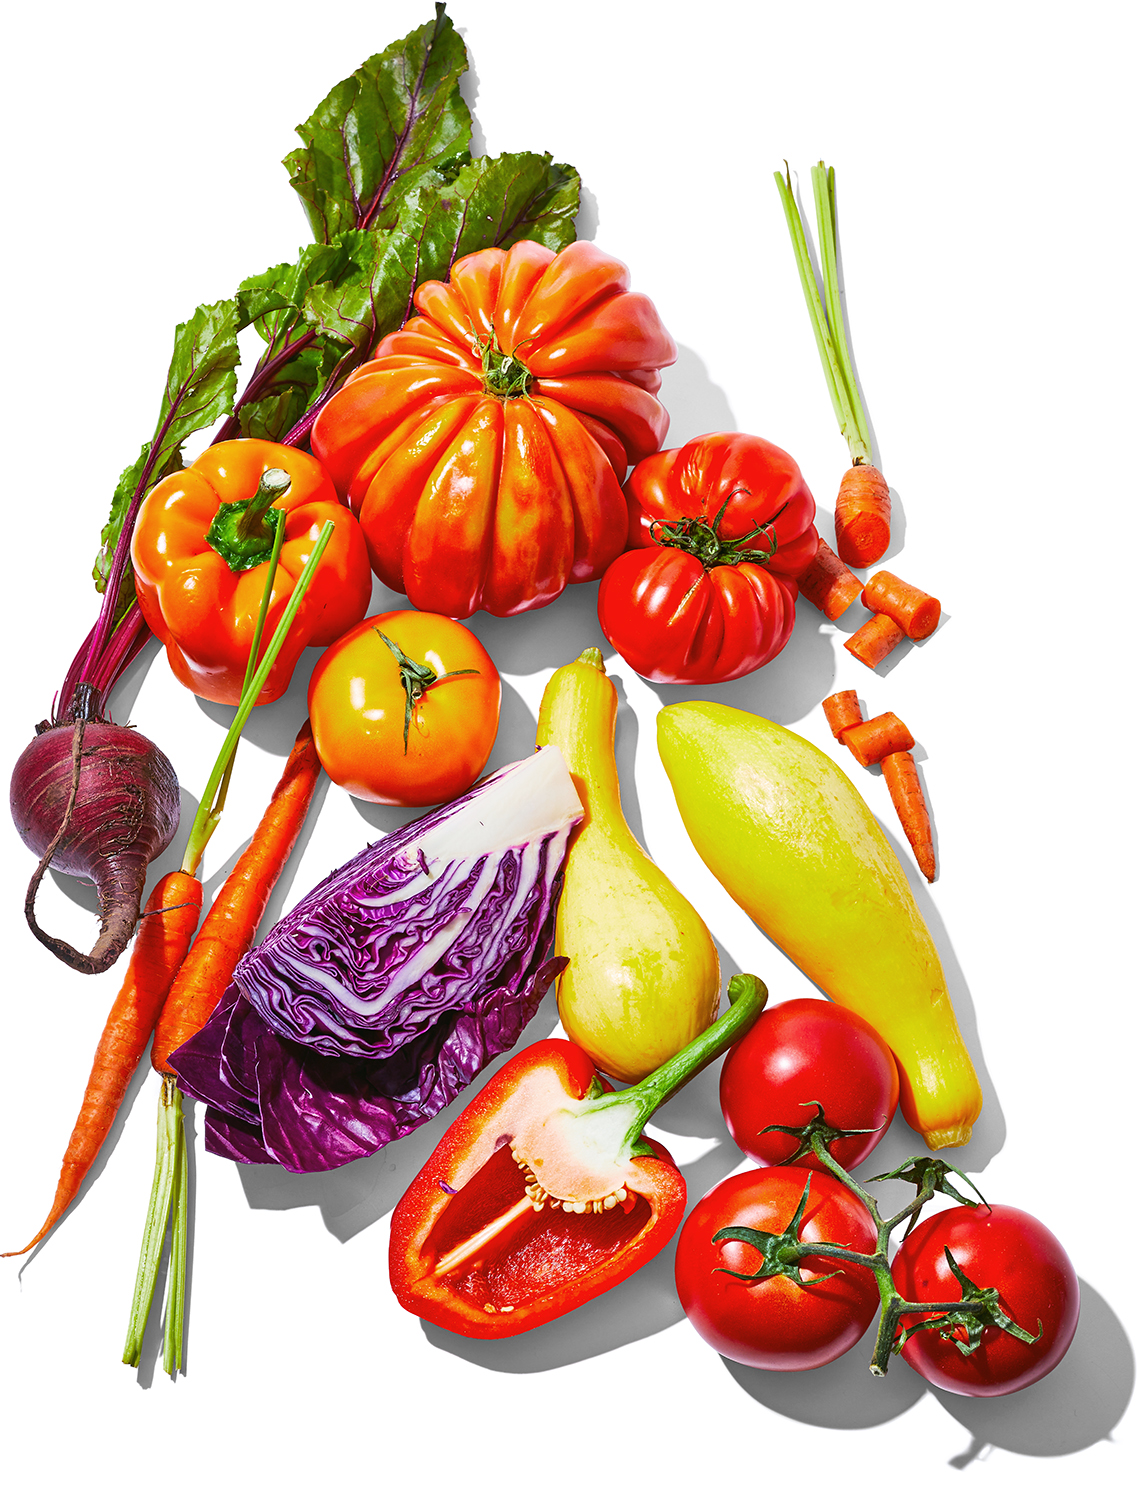 colorful variety of fresh vegetables